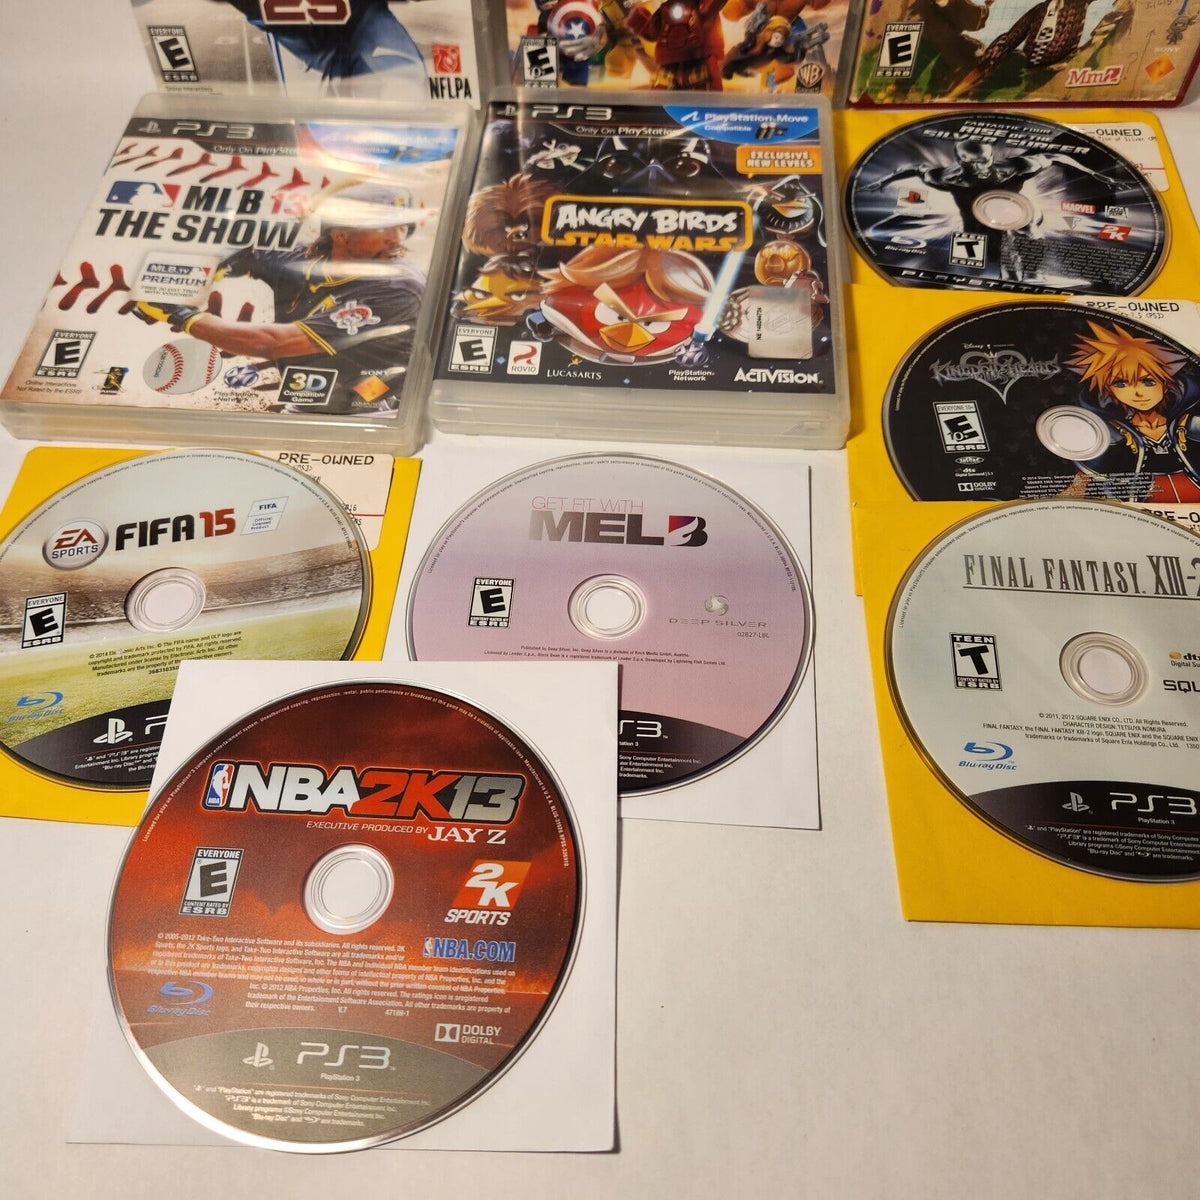 11 PS3 Games Bundle Lot - LEGO: Marvel, FF8, Angry Birds, Kingdom Hearts, Little